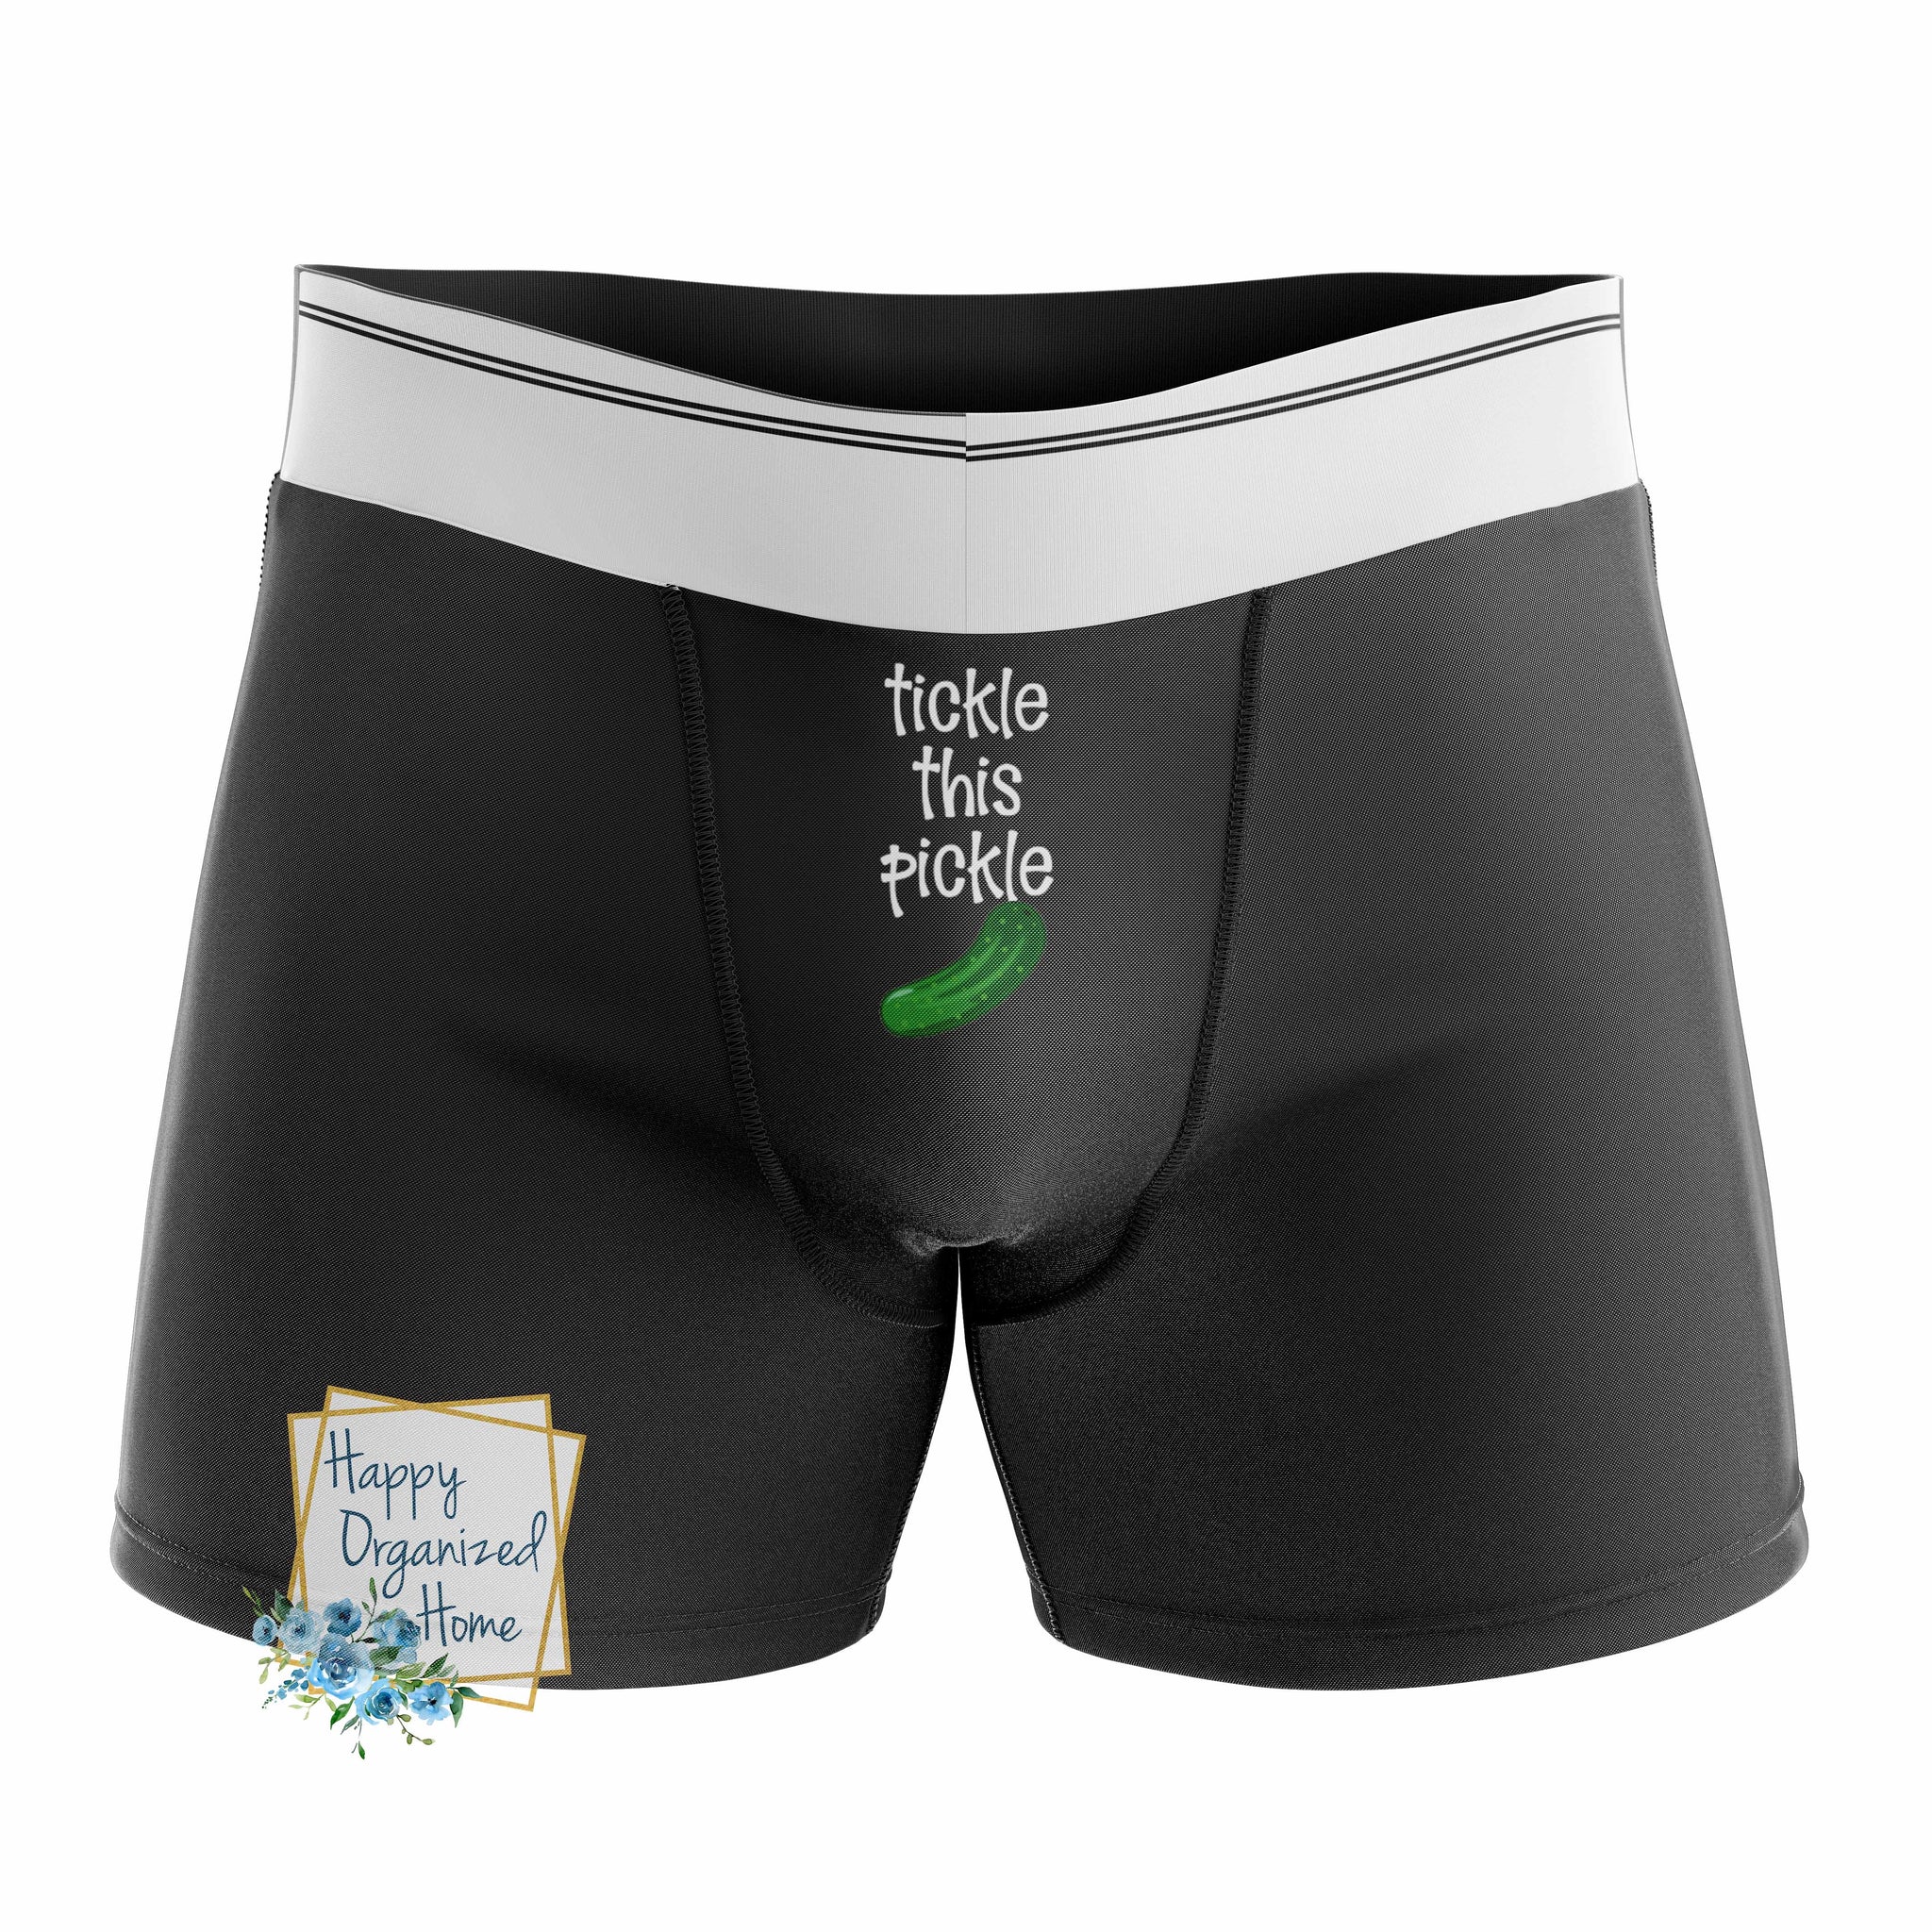 Tickle this pickle -  Men's Naughty Boxer Briefs